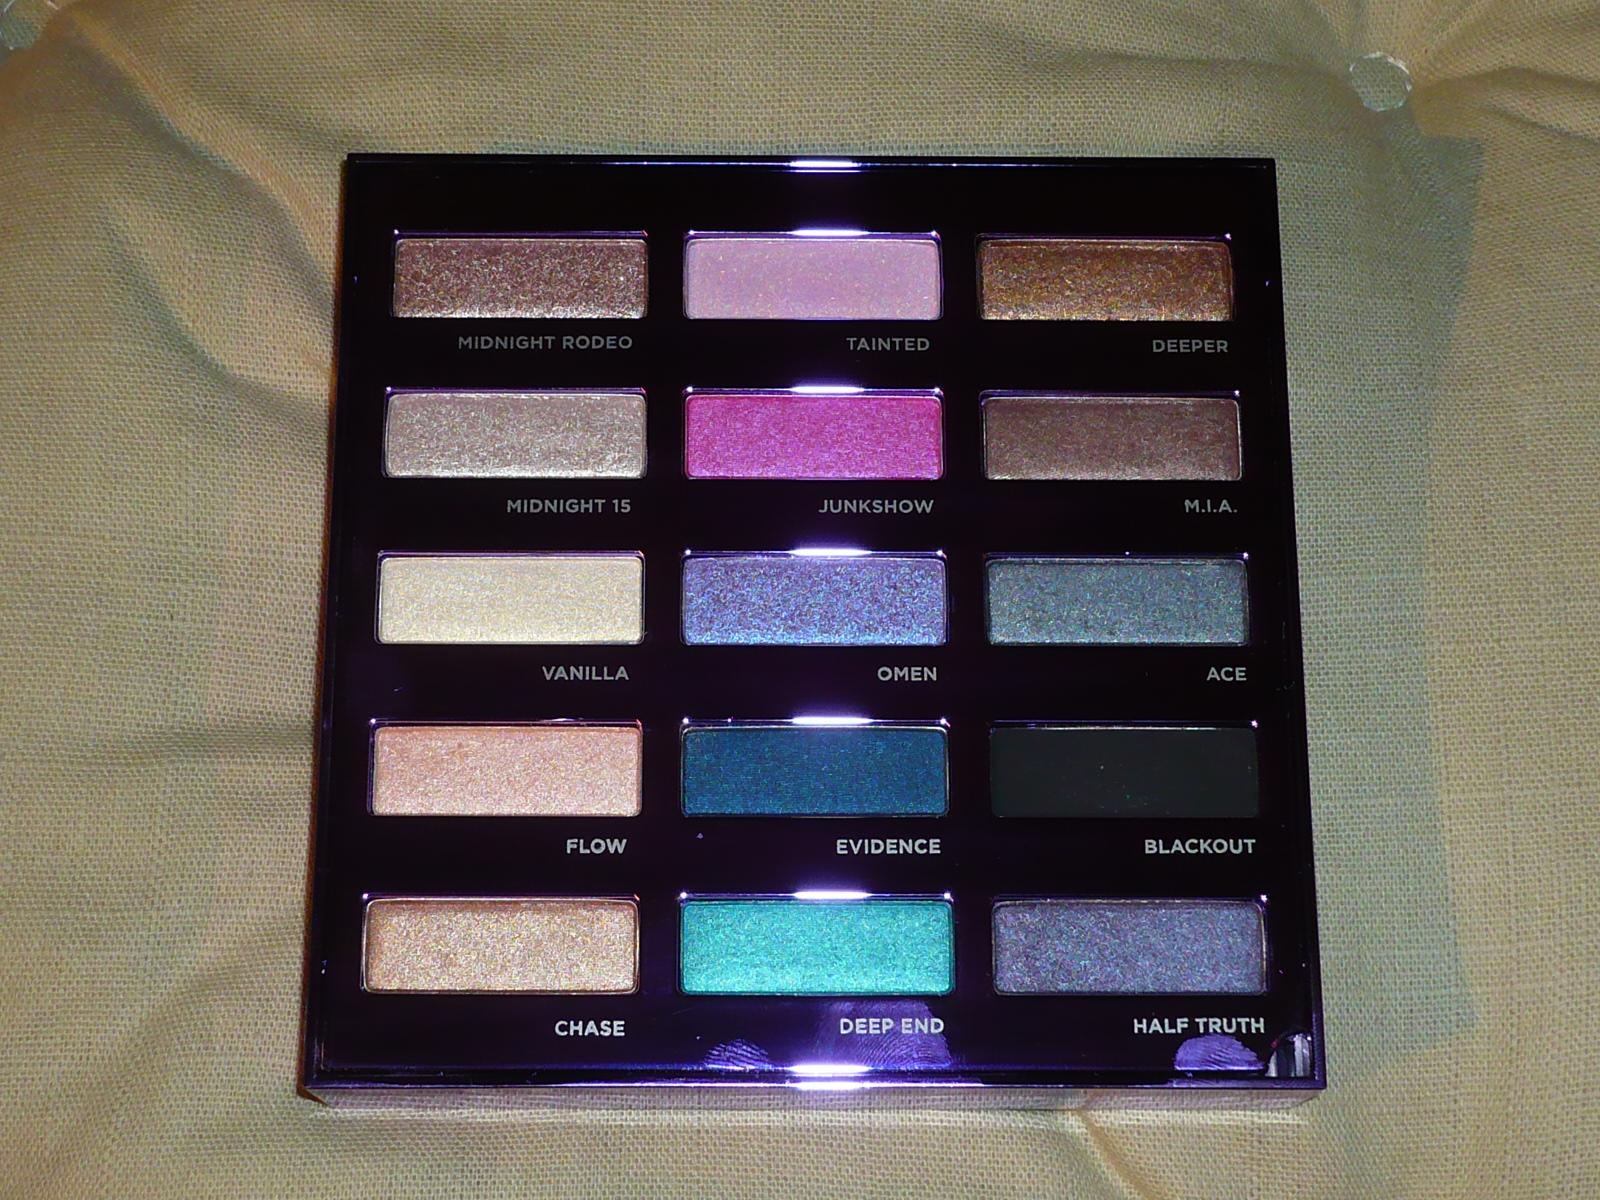 [Swatches] Urban Decay 15 year anniversary eyeshadow collection